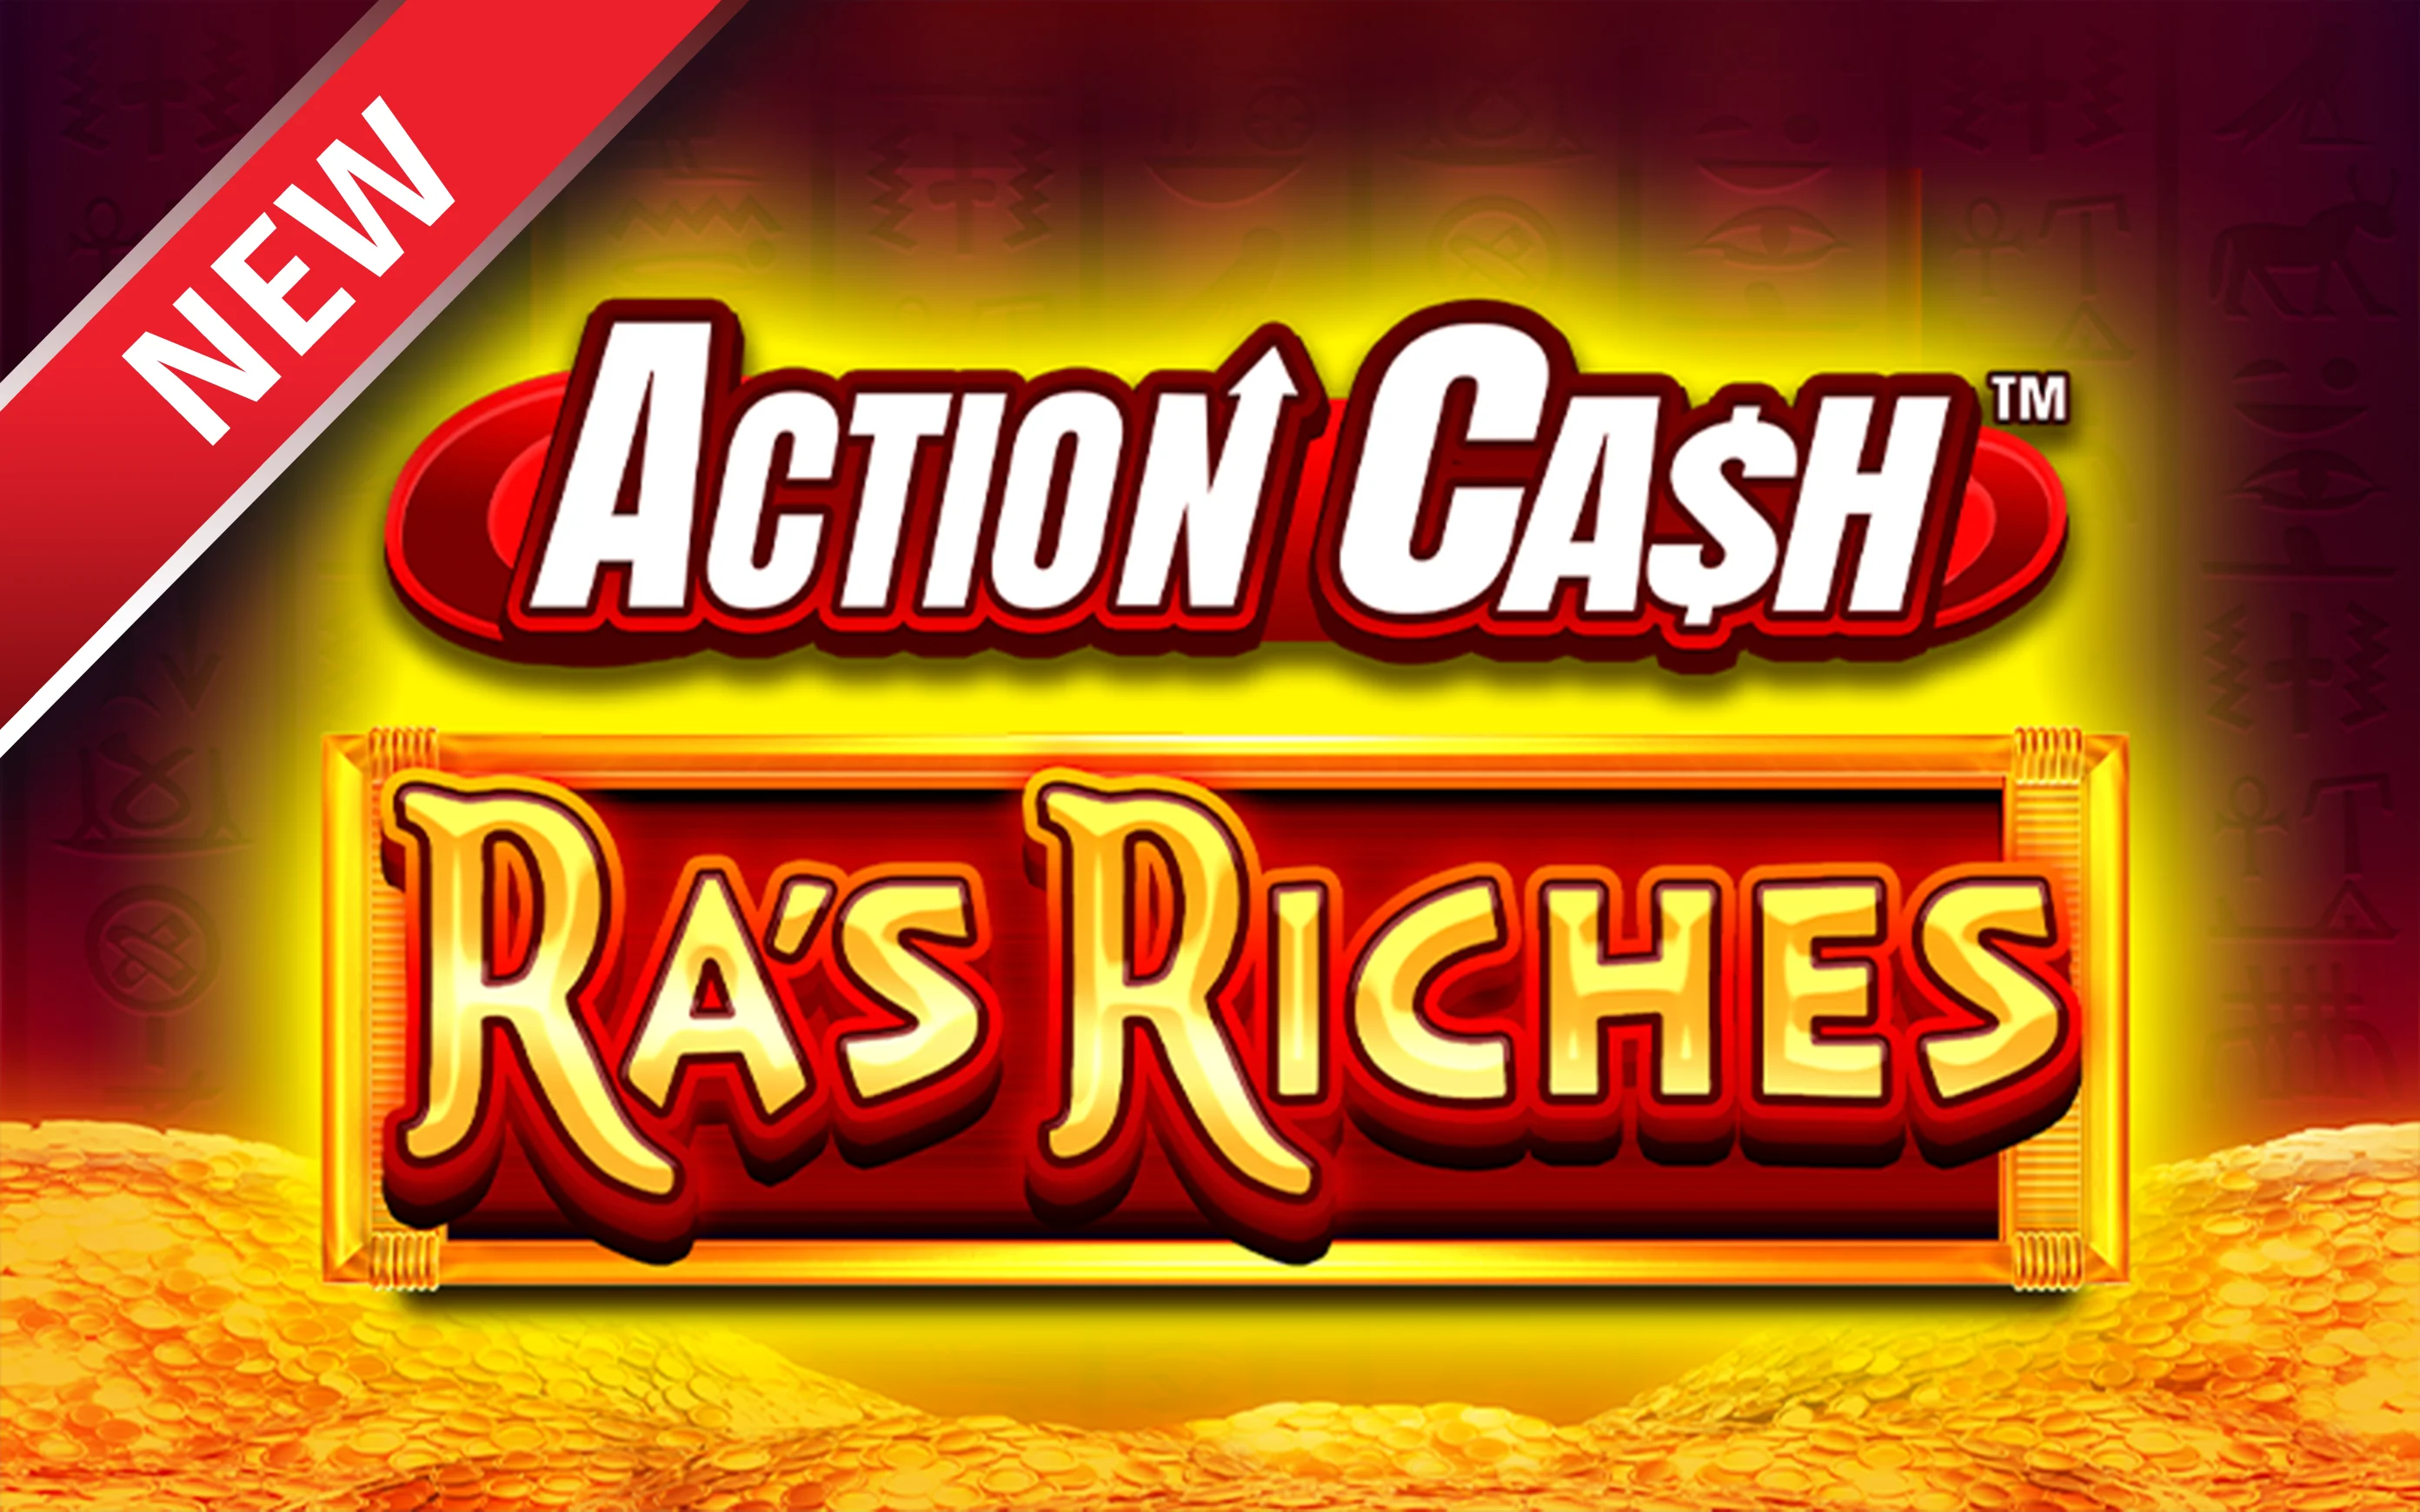 Play Action Cash™ Ra's Riches on Starcasino.be online casino